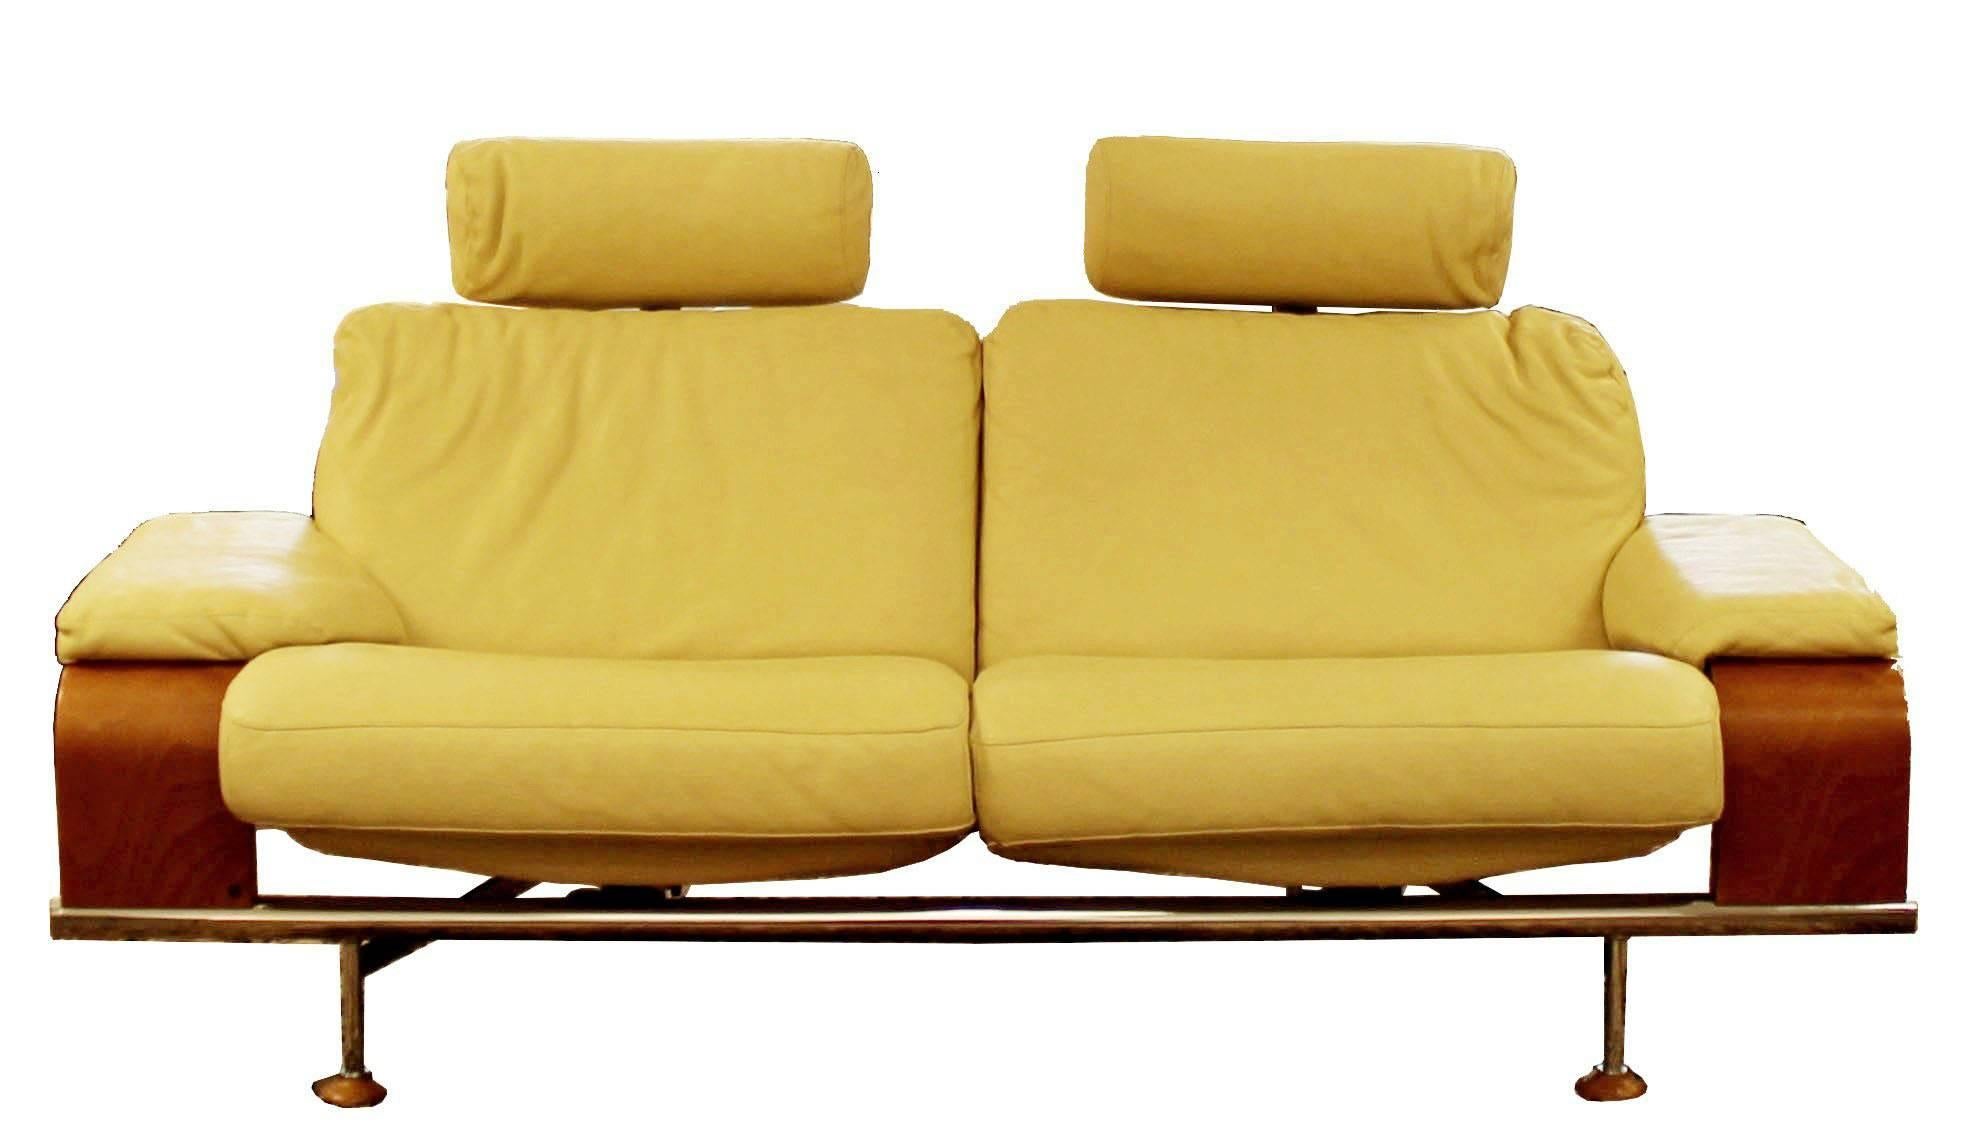 For your consideration is a phenomenal reclining set made of bentwood, chrome and leather, including a reclining sofa and pair of reclining lounge chairs, from Swedish company Nelo, circa the 1980s. In excellent condition. in the most amazing pebble